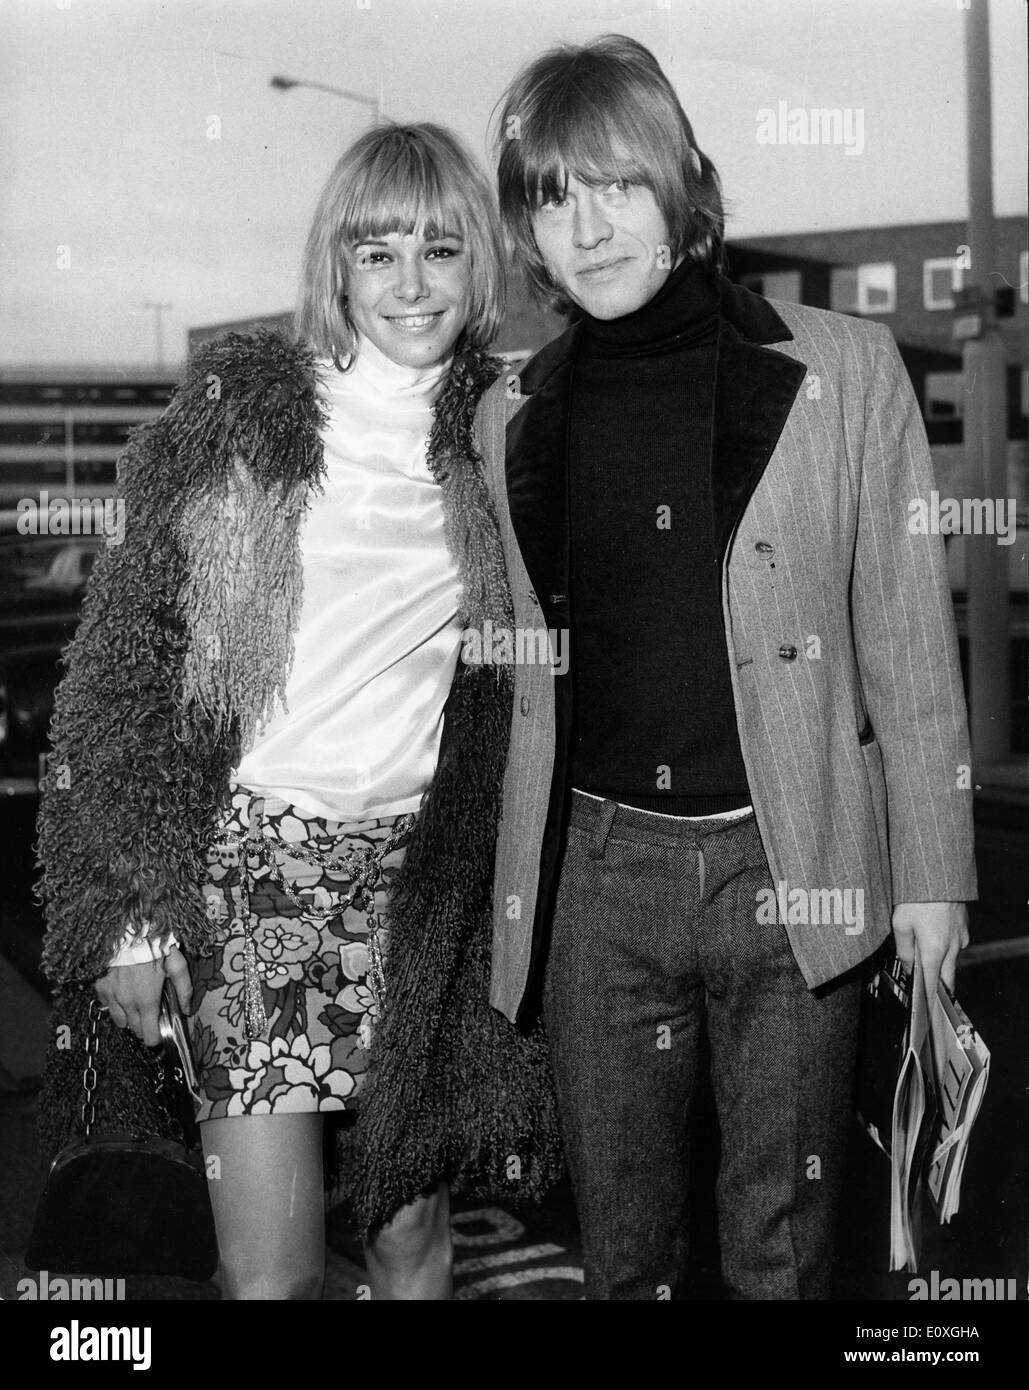 The Rolling Stones guitarist Brian Jones with his girlfriend Anita Pallenberg at the airport Stock Photo